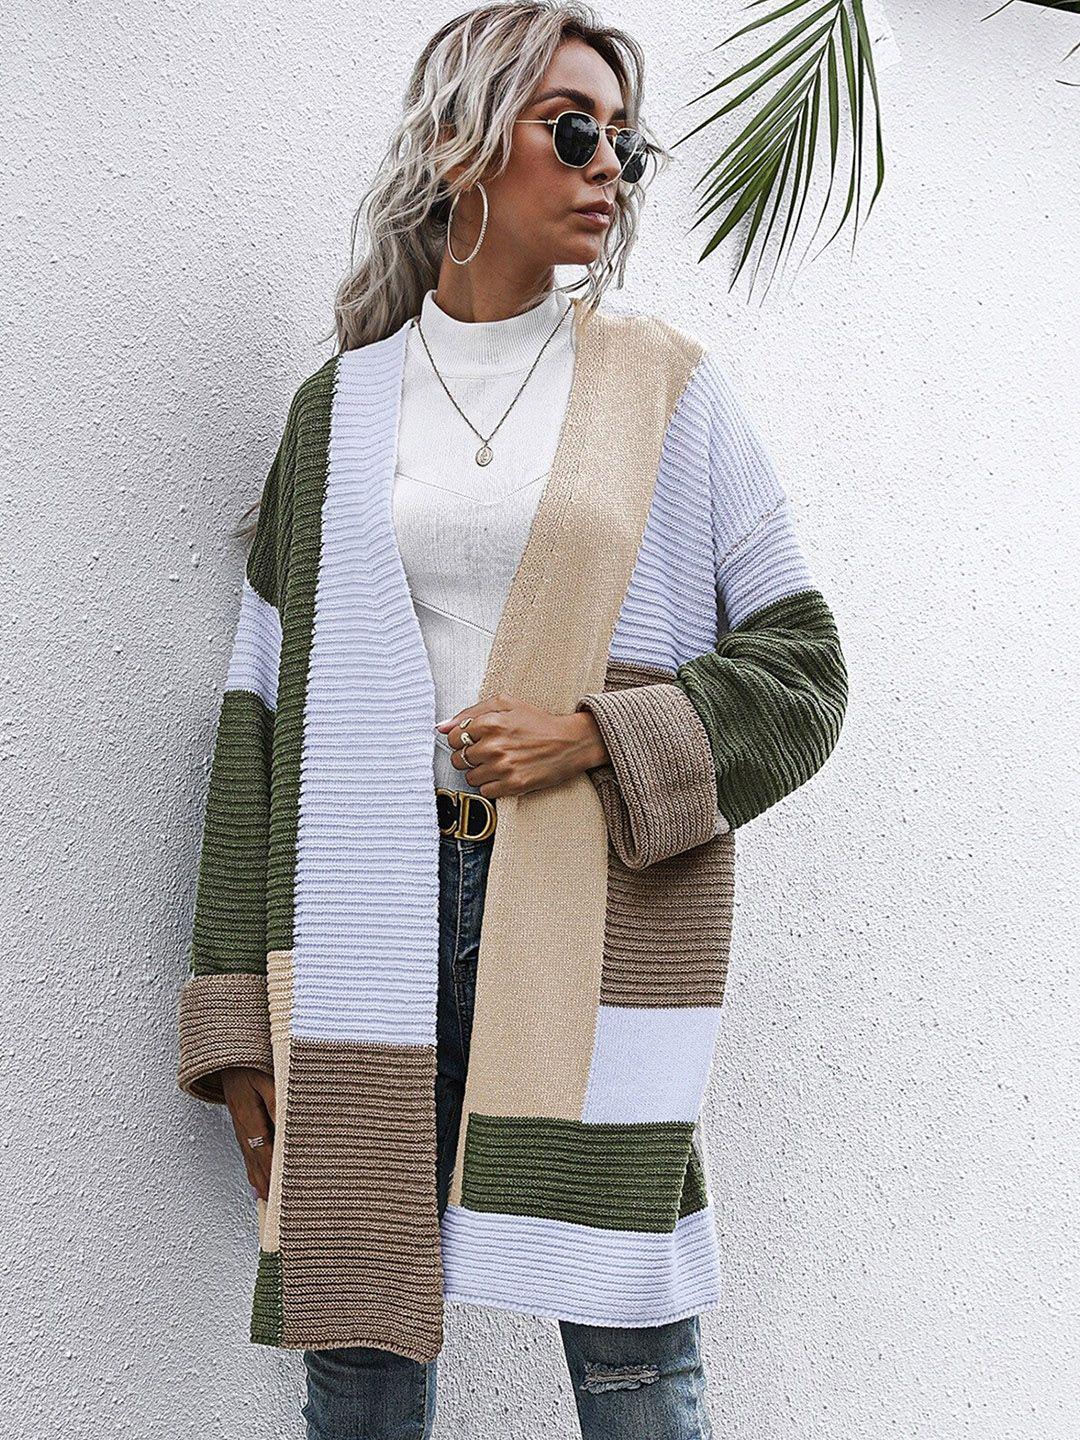 stylecast olive green & white colourblocked longline front-open sweater